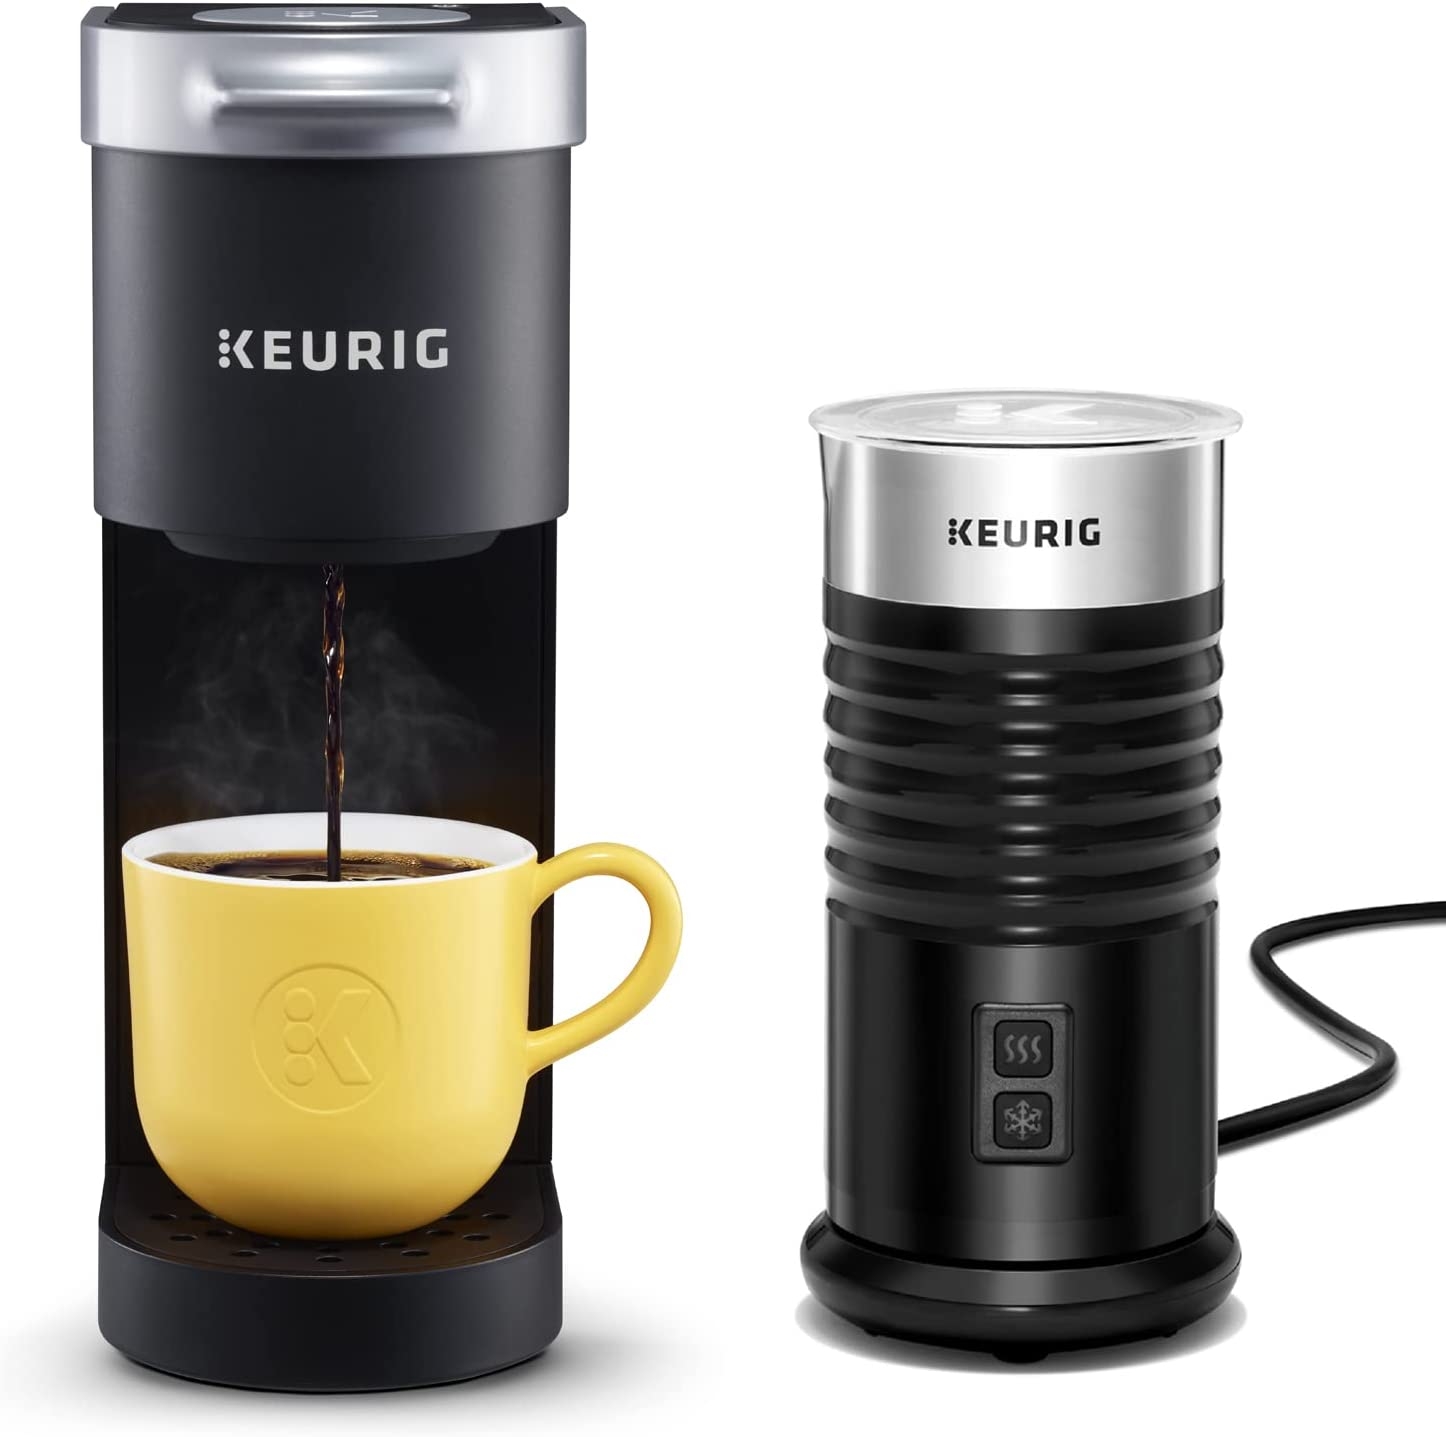 Keurig K-Mini Coffee Maker, Single Serve K-Cup Pod Coffee Brewer, 6 to 12 oz. Brew Sizes, Black Import To Shop ×Product